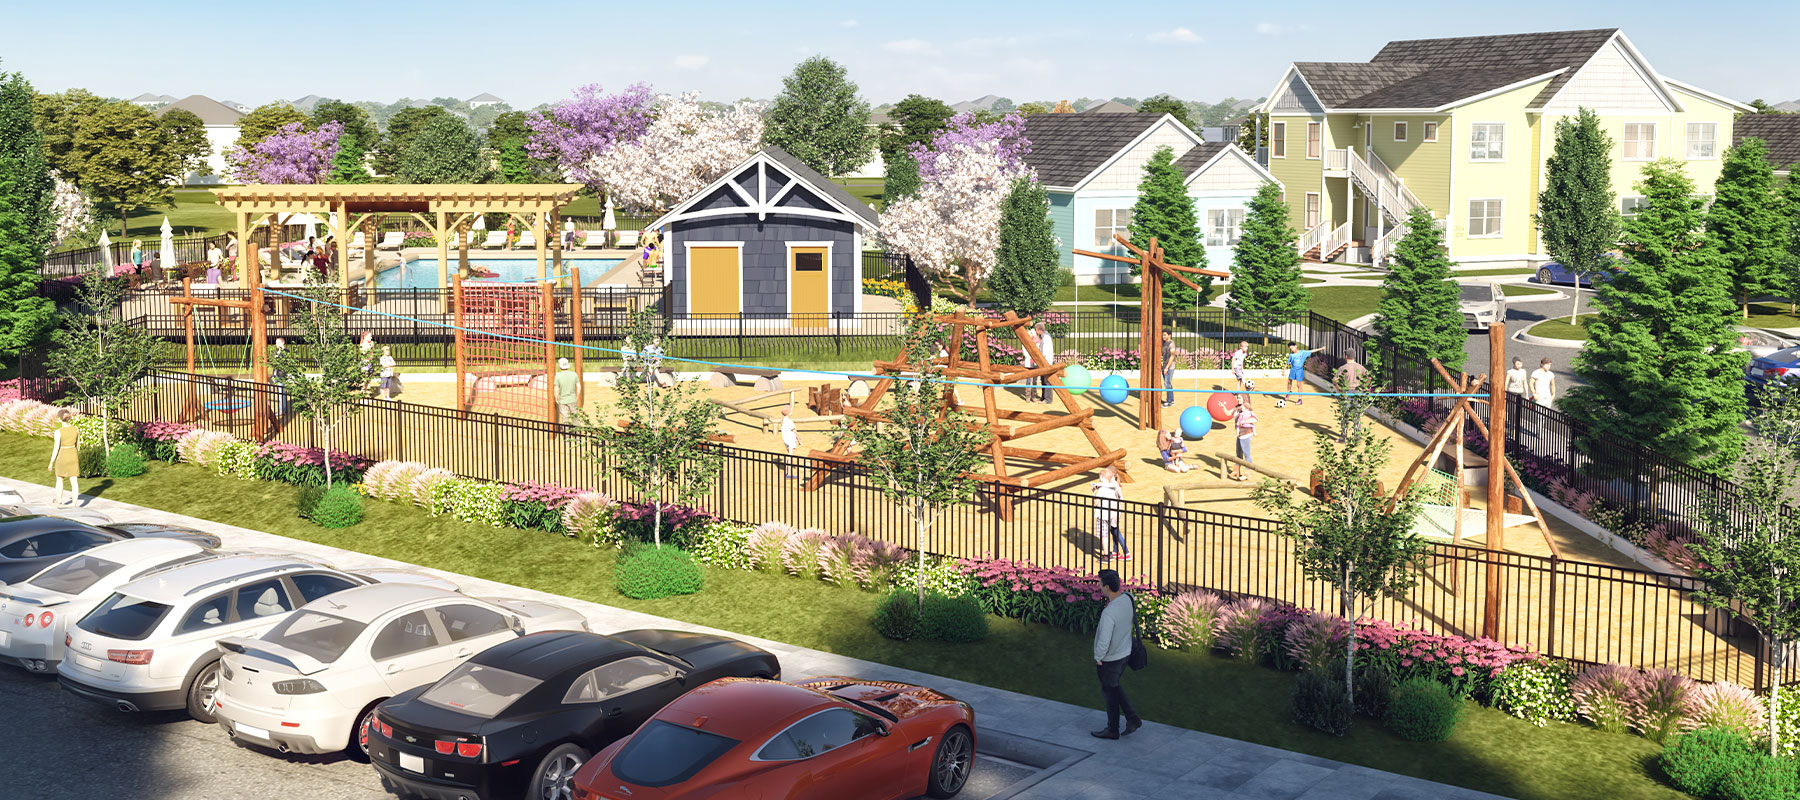 The Cove playground rendering with cars in the parking lot and pedestrians walking